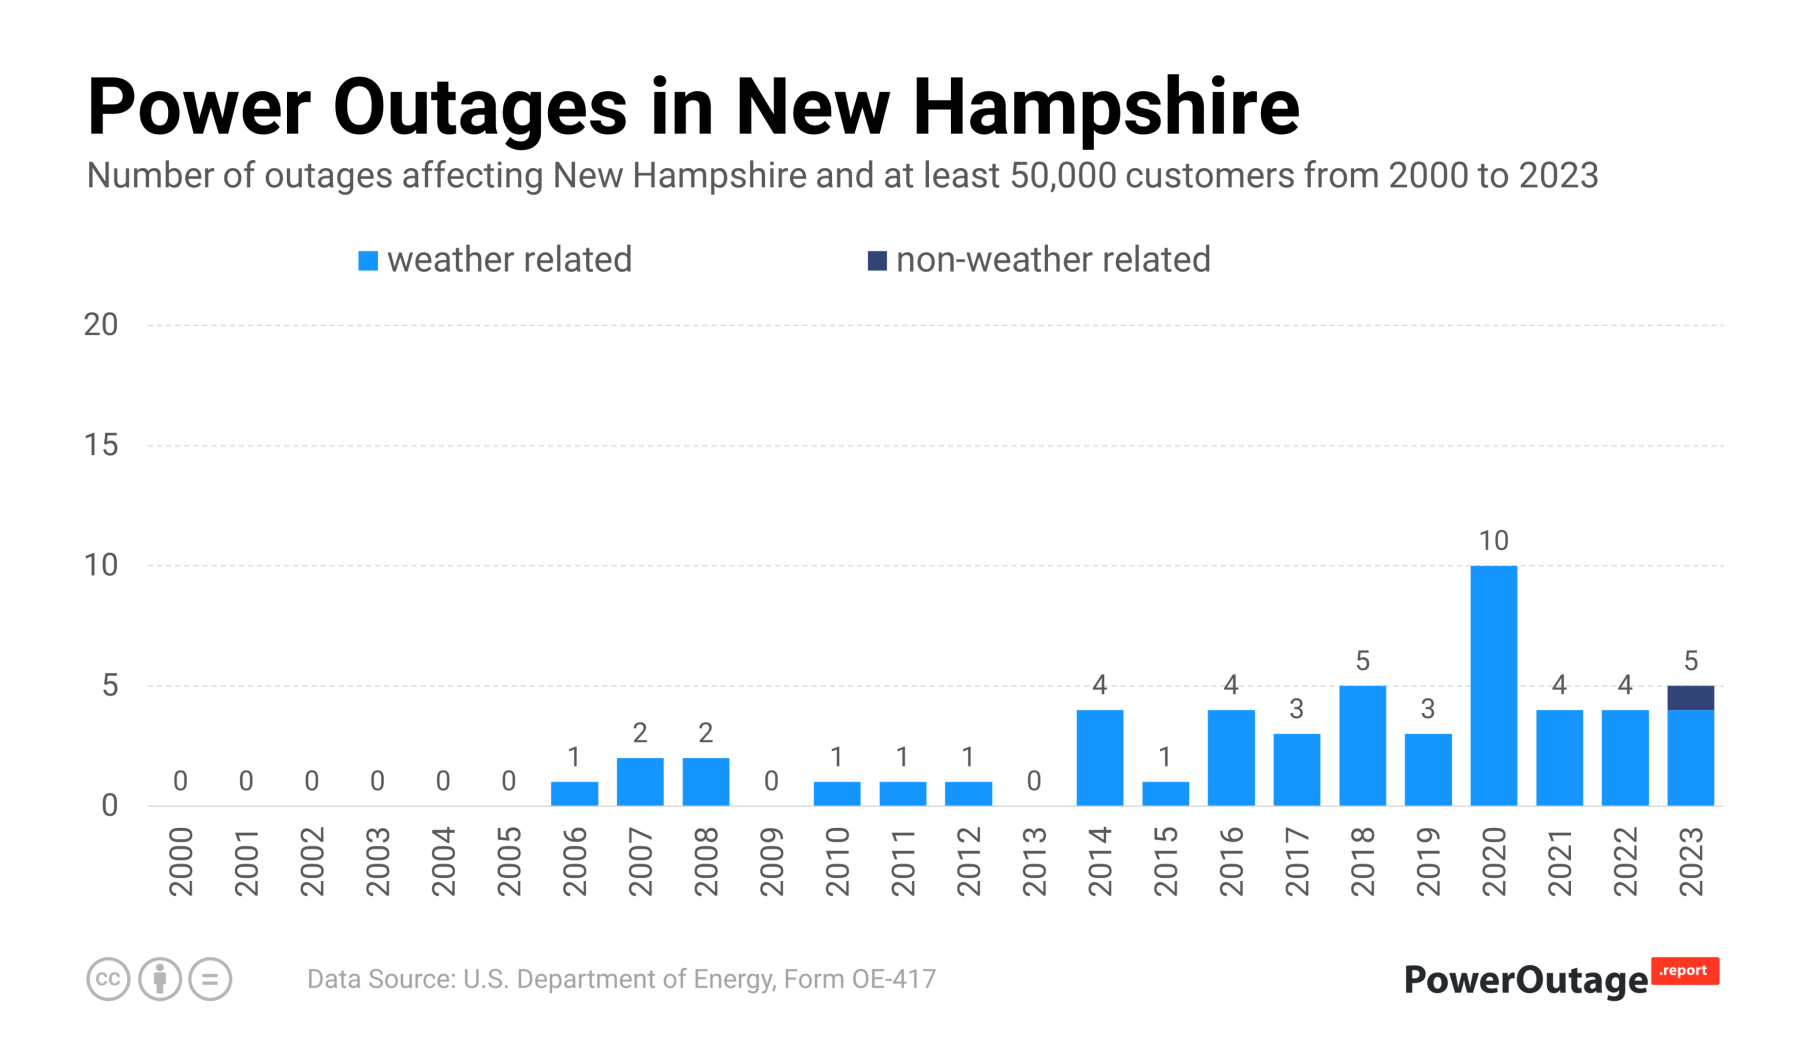 New Hampshire Power Outage Statistics (2000 - 2022)